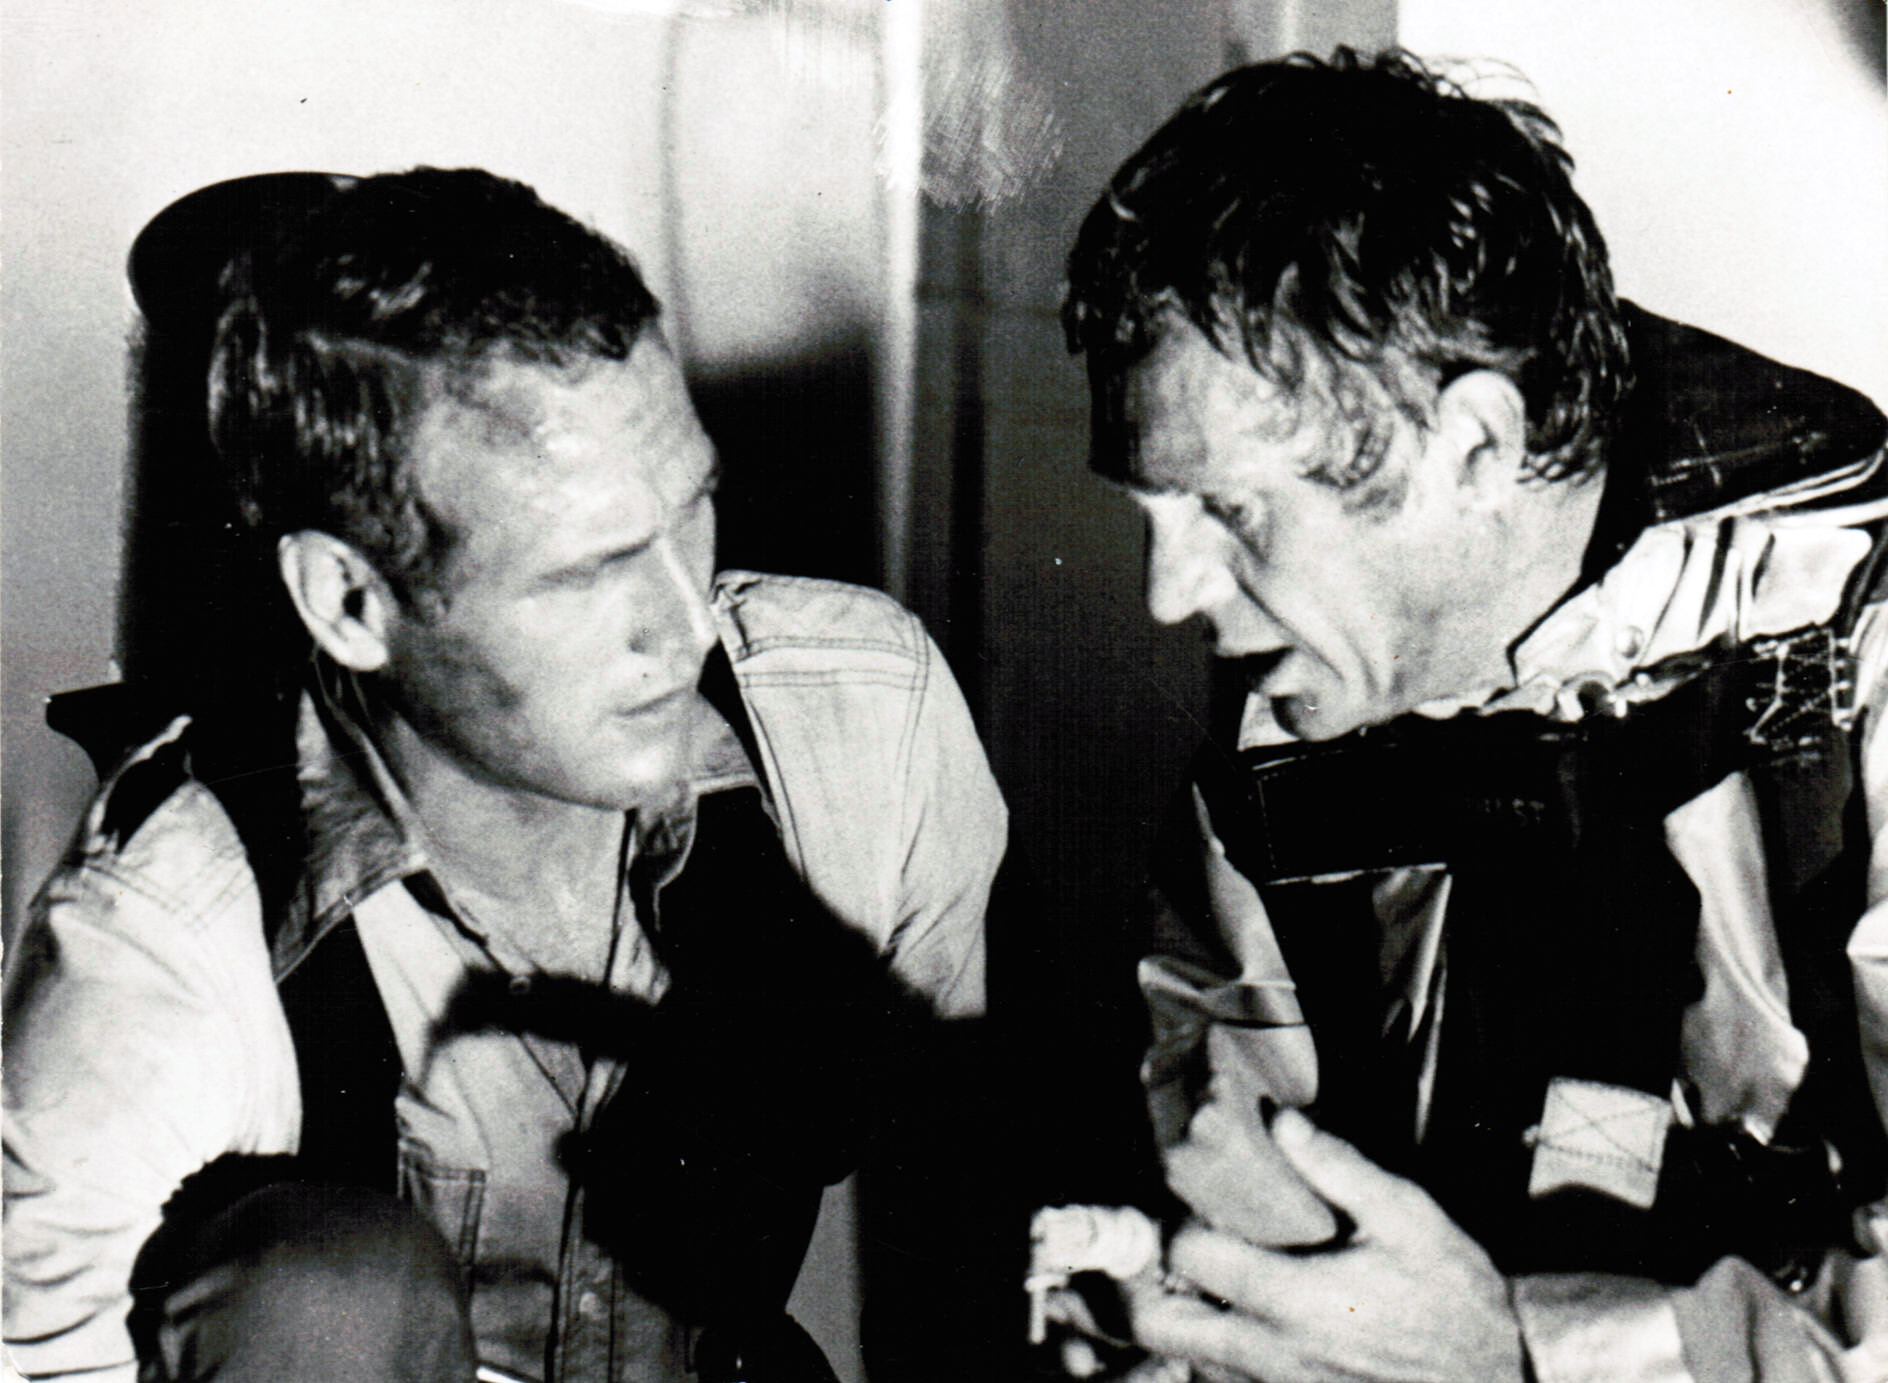 Hollywood - Paul Newman, Steve McQueen (The Towering Inferno)